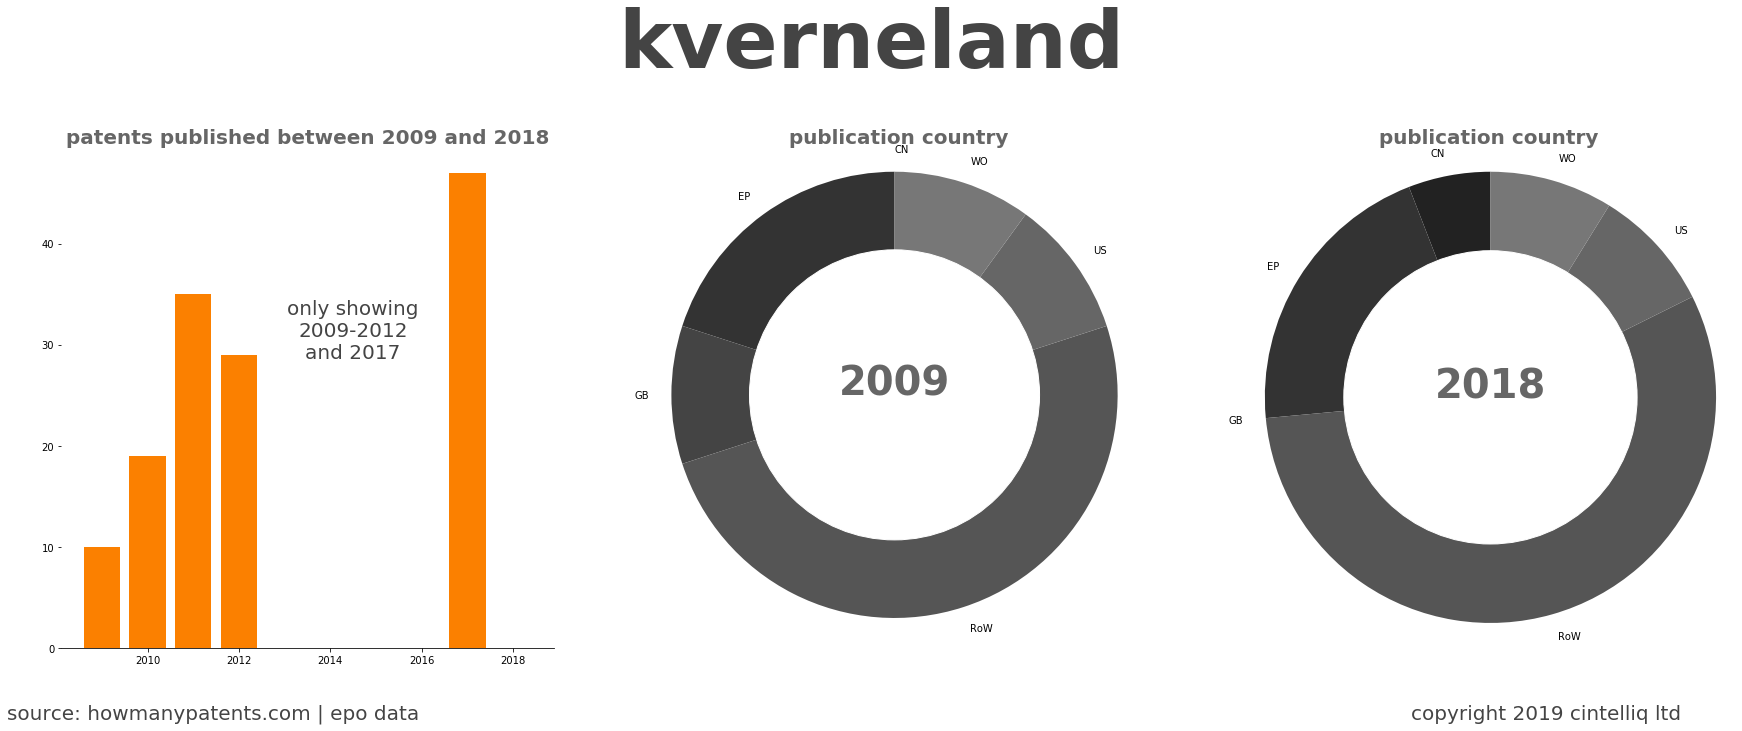 summary of patents for Kverneland